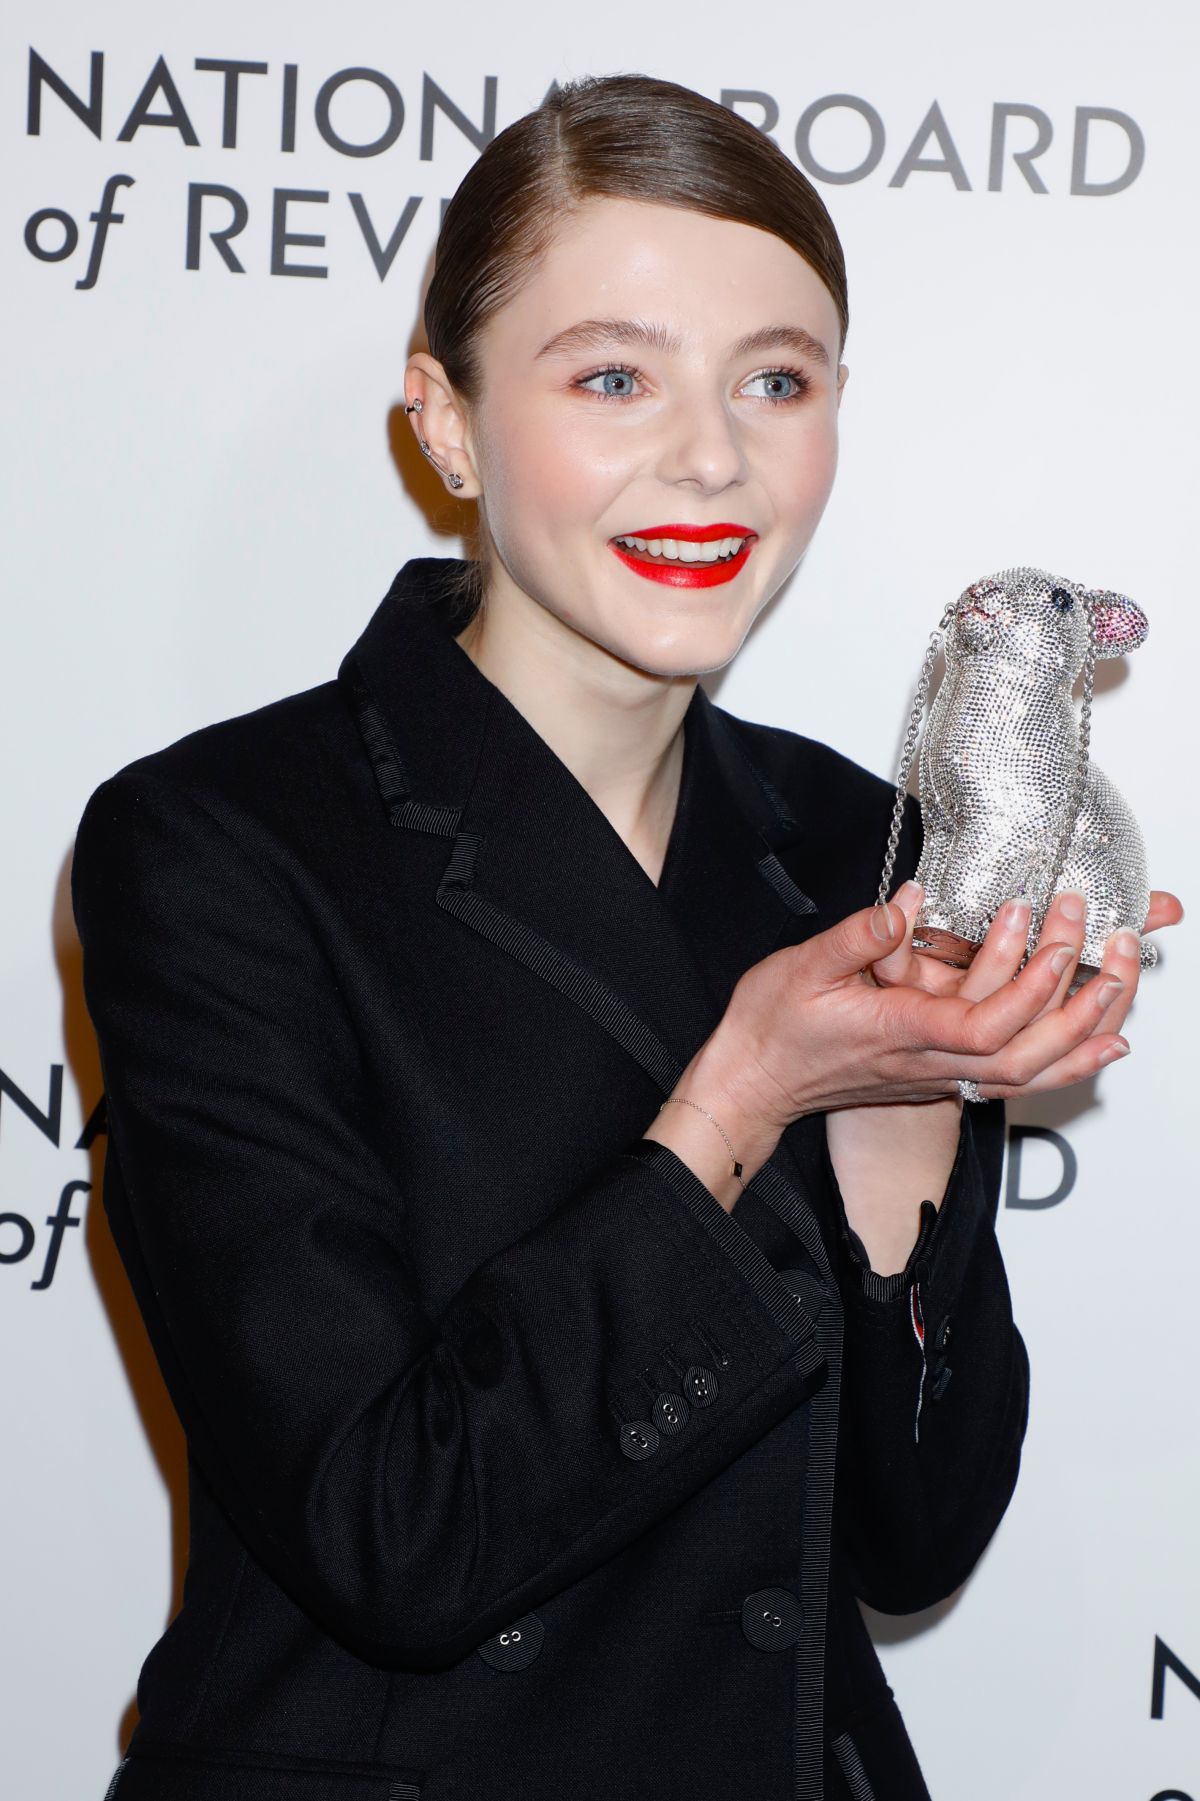 THOMASIN MCKENZIE at National Board of Review Awards Gala in New York 01/08/2019 ...